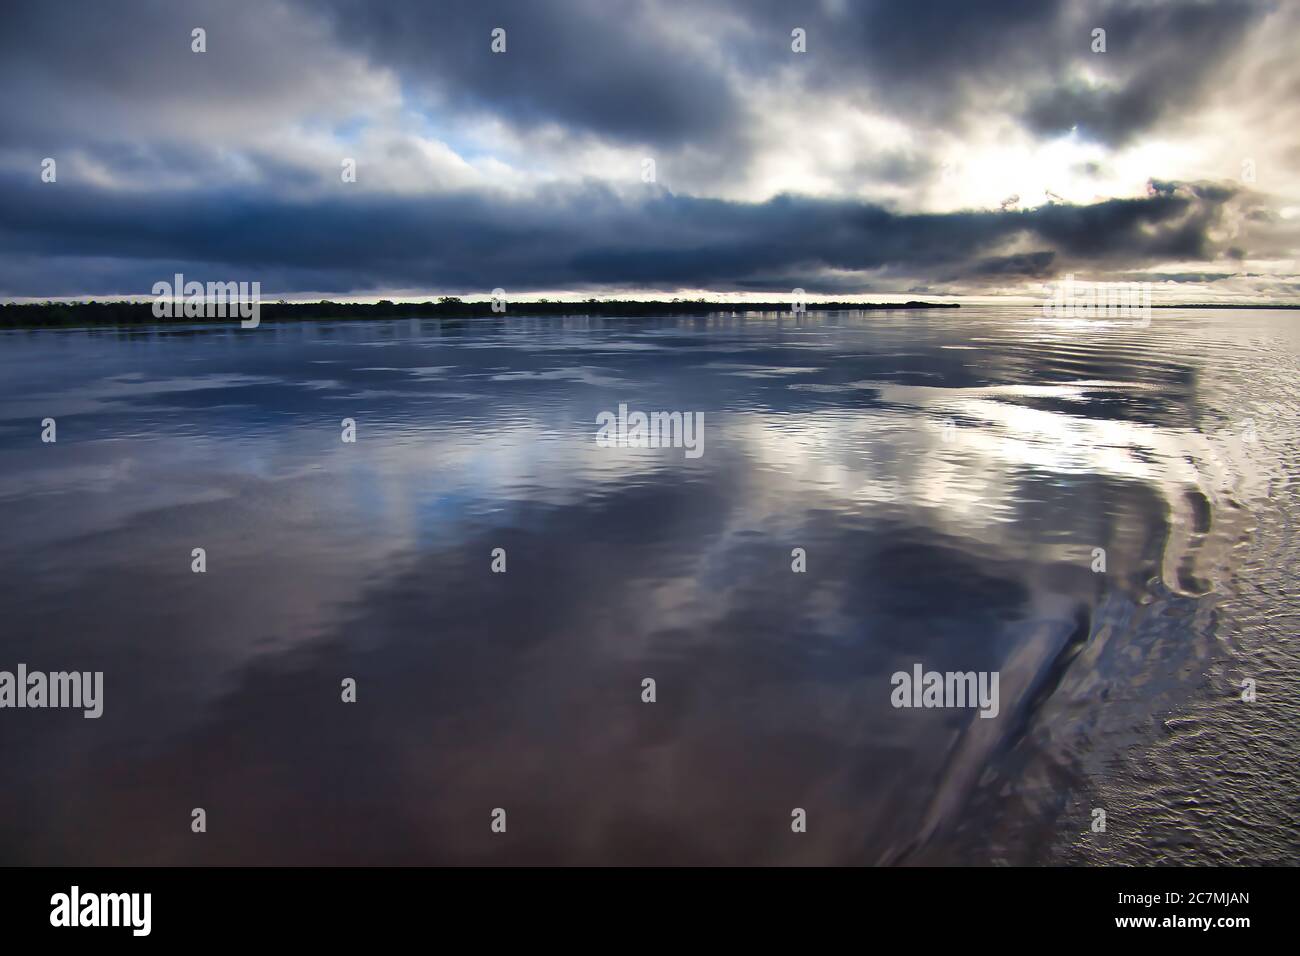 View across the Amazon River with mirror smooth surface reflecting exactly the sky and clouds above, near Manaus, Amazonas State, Brazil Stock Photo